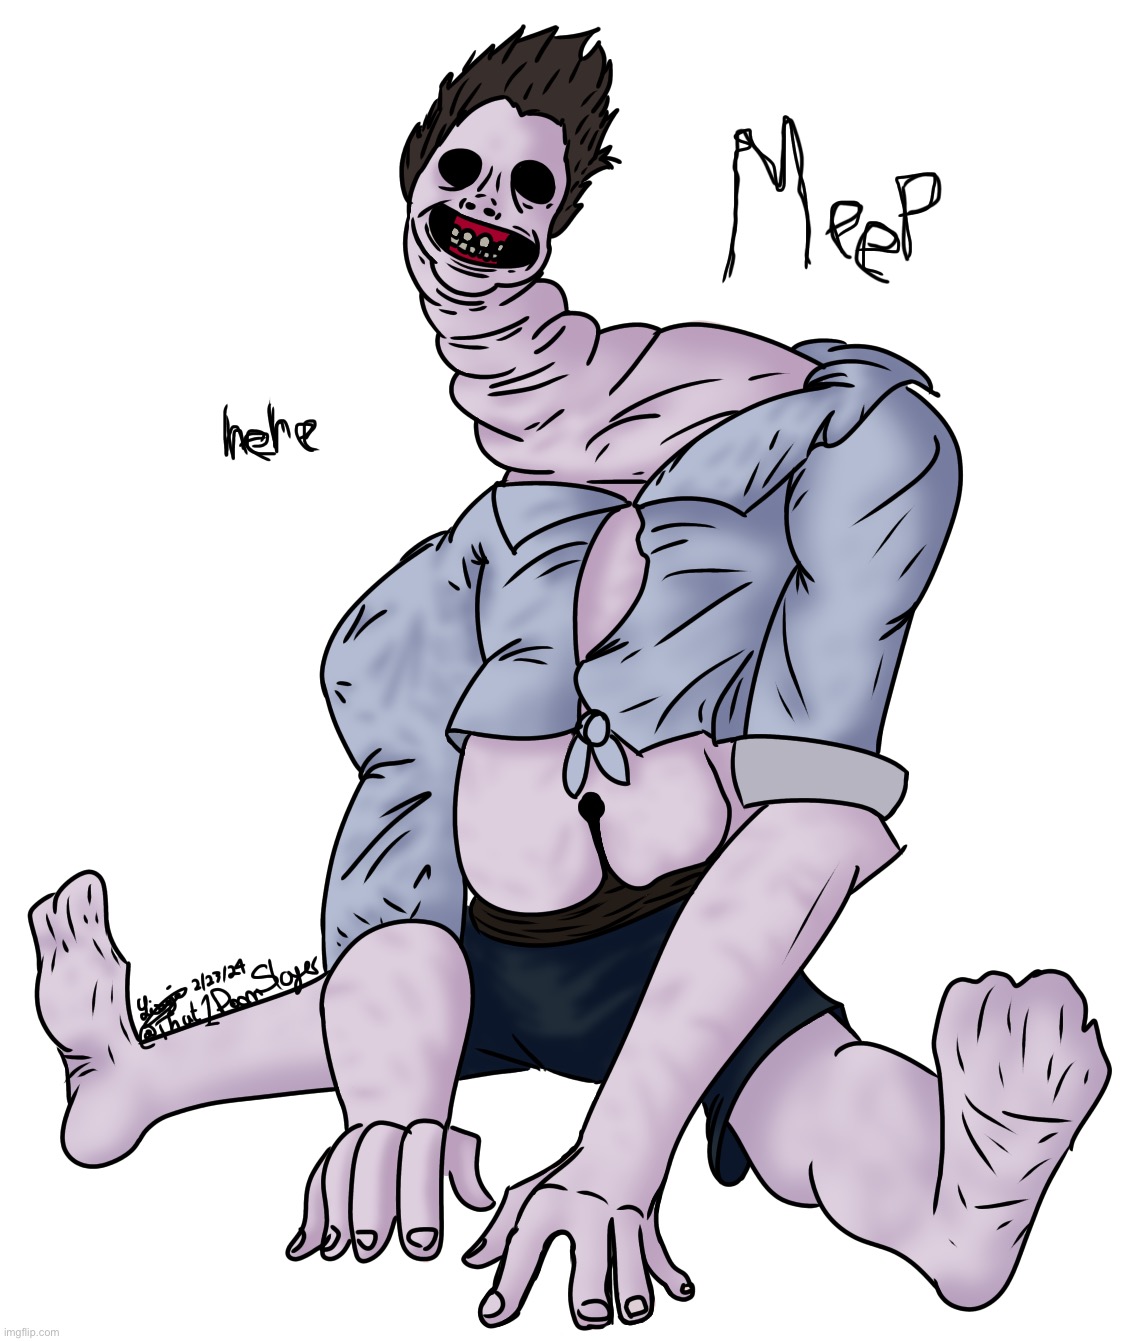 i love the new dbd killer look at this little doofus hes so eepy | image tagged in dead by daylight,digital art,yippee | made w/ Imgflip meme maker